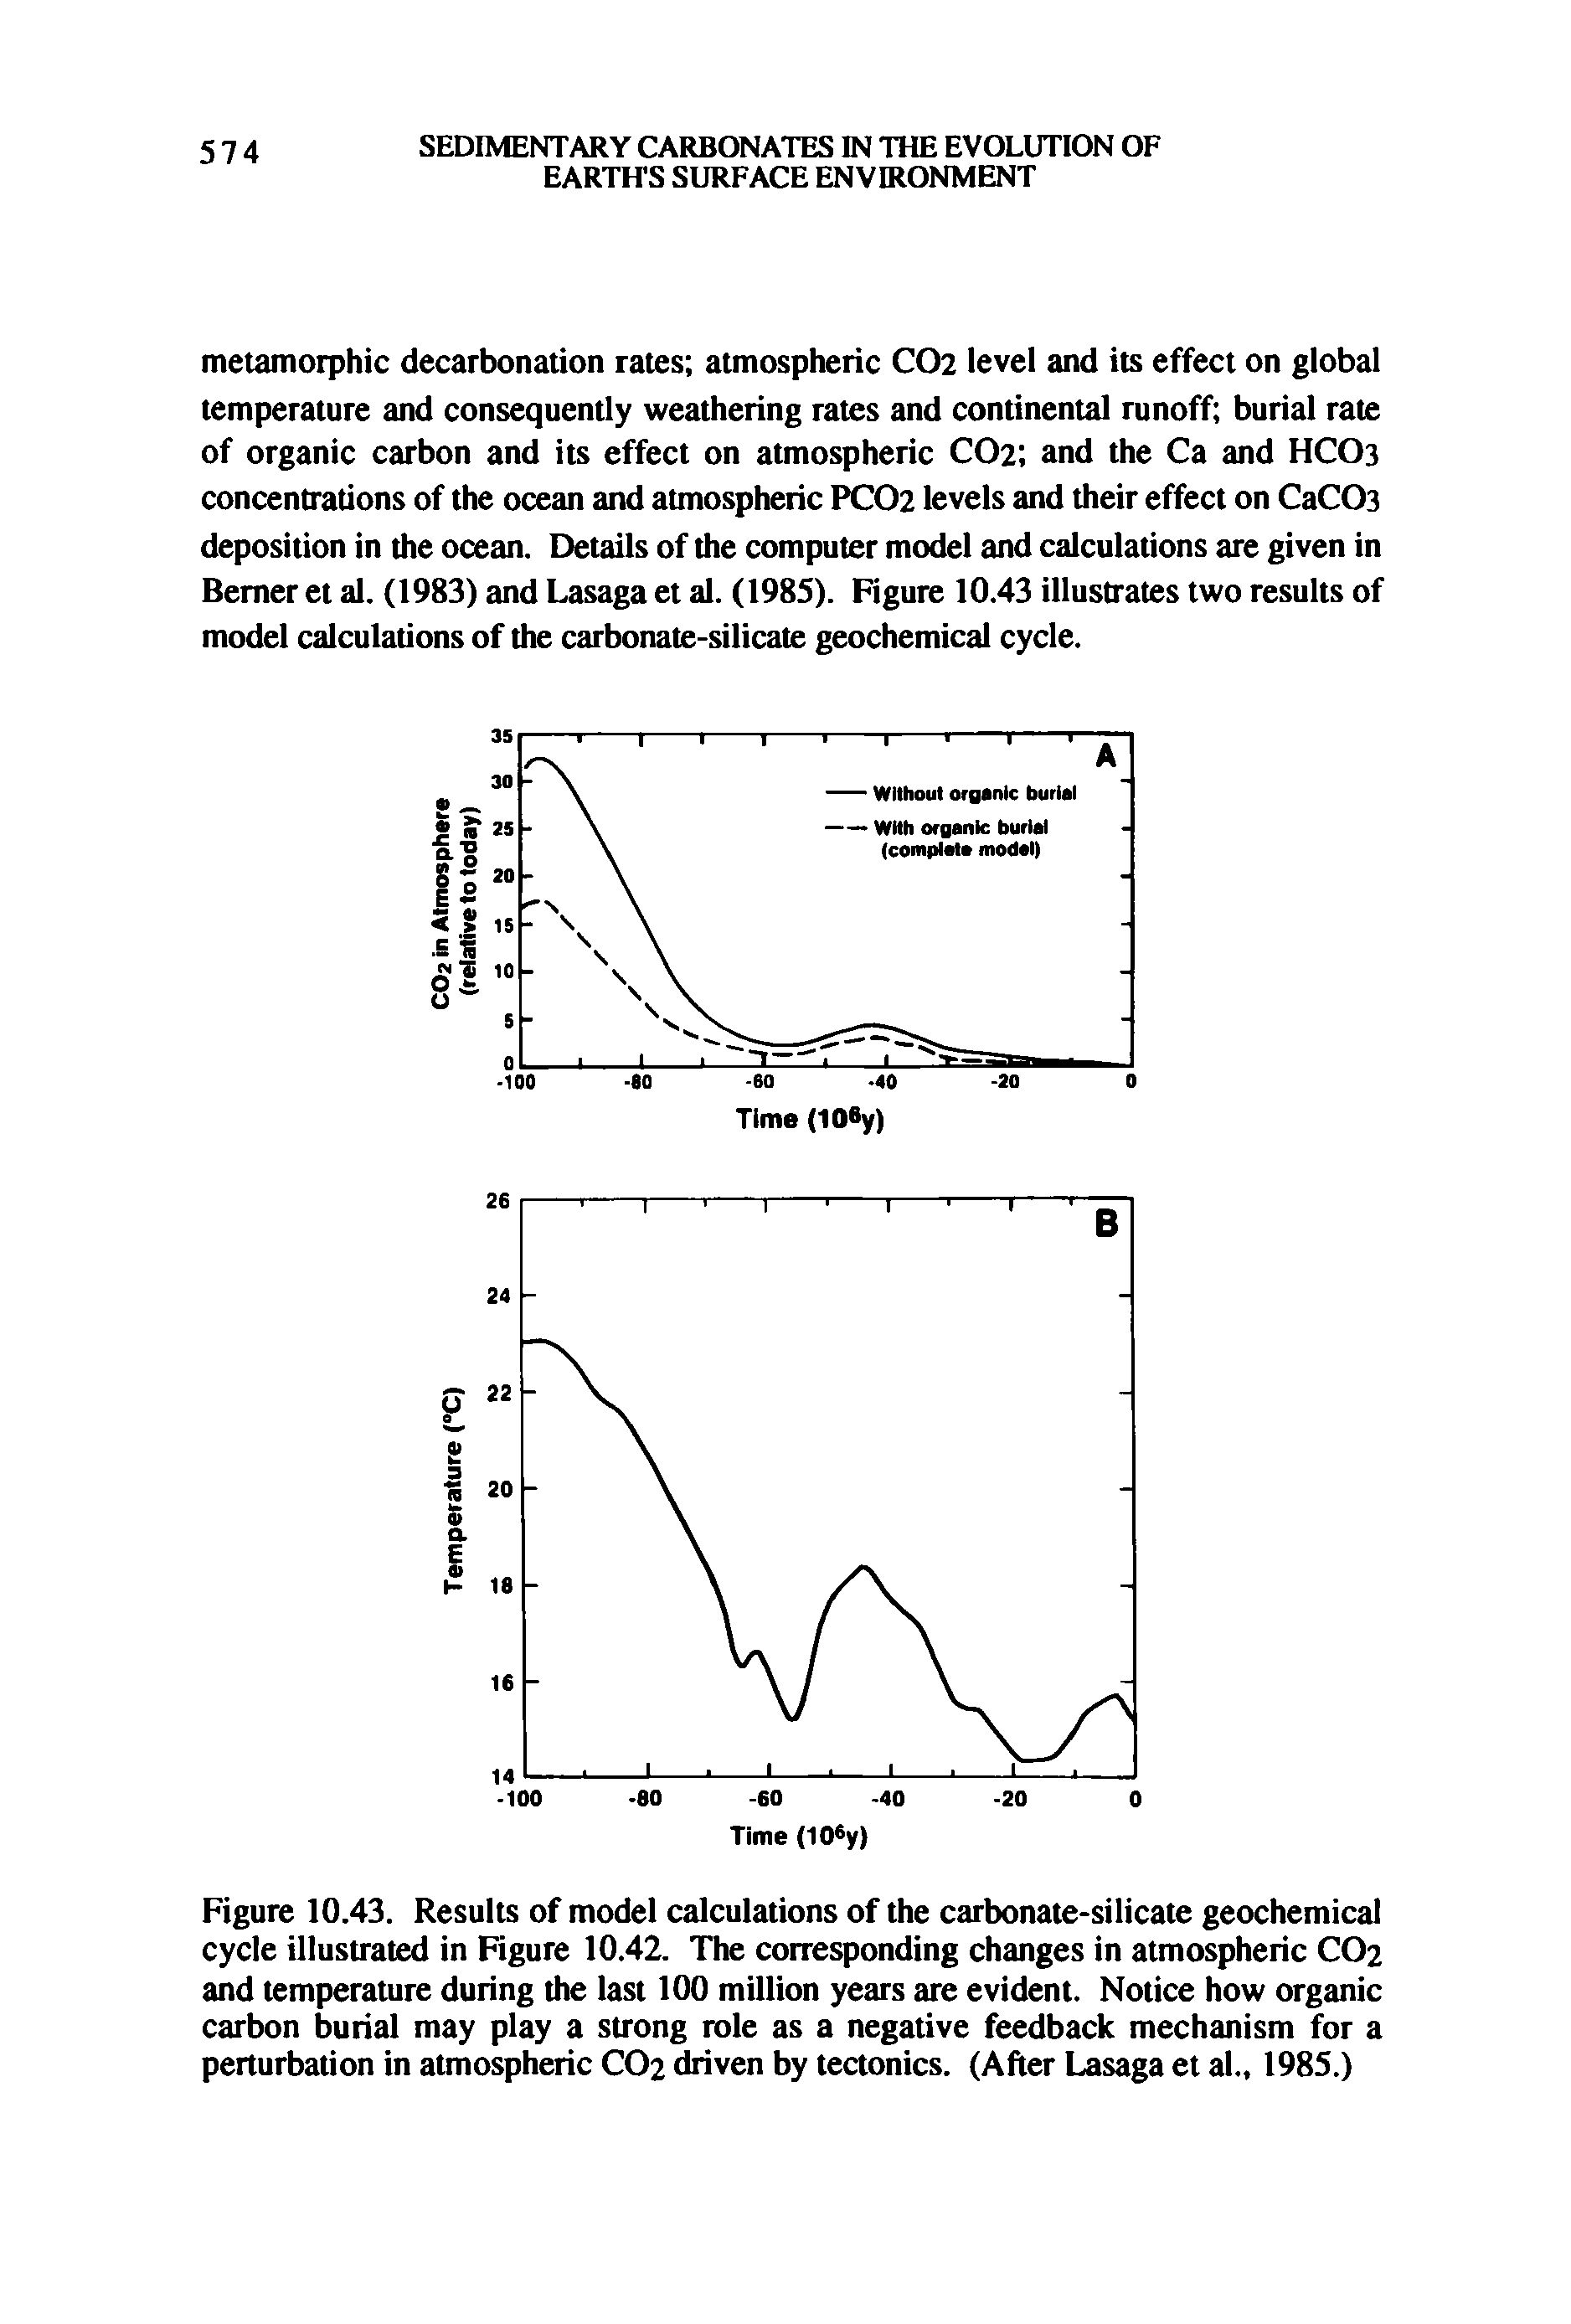 Figure 10.43. Results of model calculations of the carbonate-silicate geochemical cycle illustrated in Figure 10.42. The corresponding changes in atmospheric CO2 and temperature during the last 100 million years are evident. Notice how organic carbon burial may play a strong role as a negative feedback mechanism for a perturbation in atmospheric CO2 driven by tectonics. (After Lasaga et al., 1985.)...